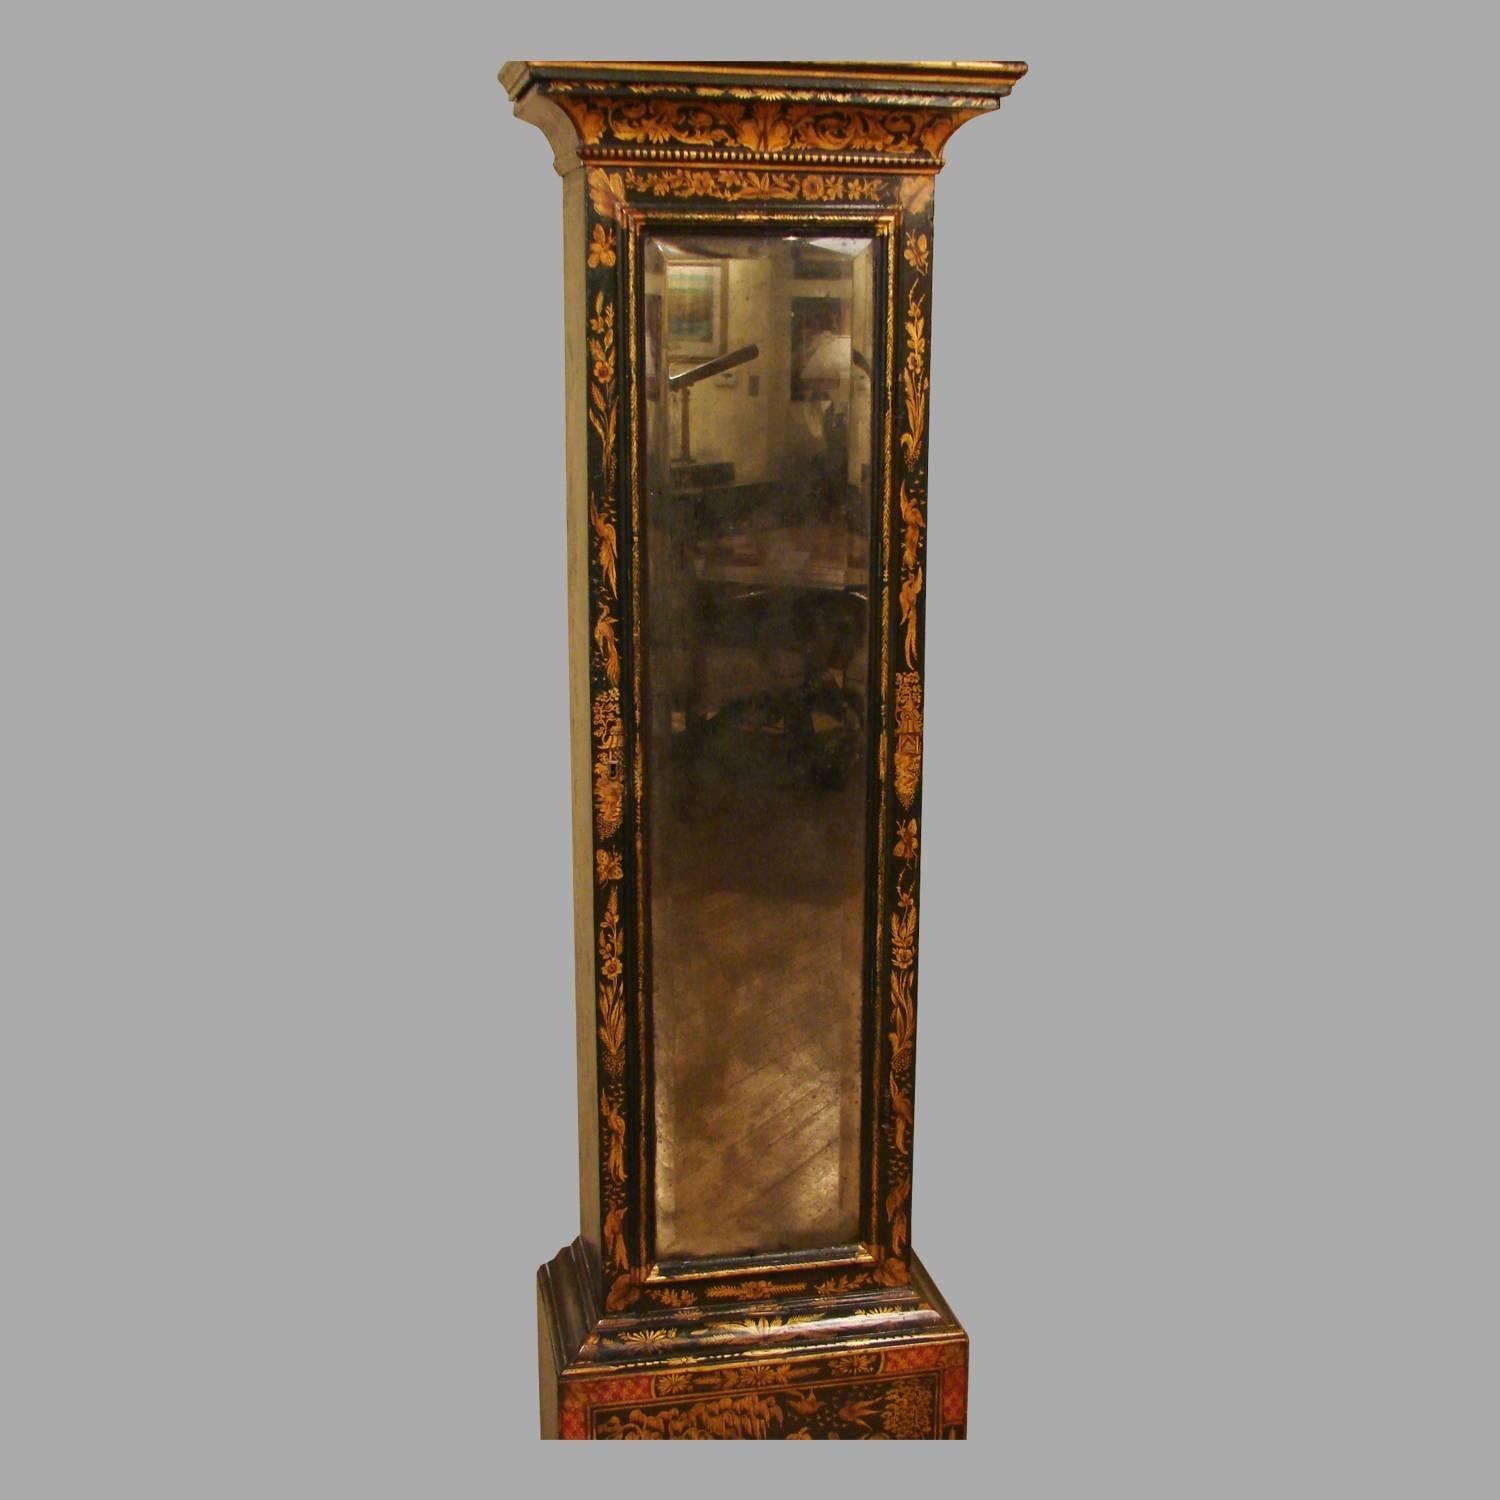 English Fine George I Green Japanned Tall Case Clock with Mirrored Door by William King